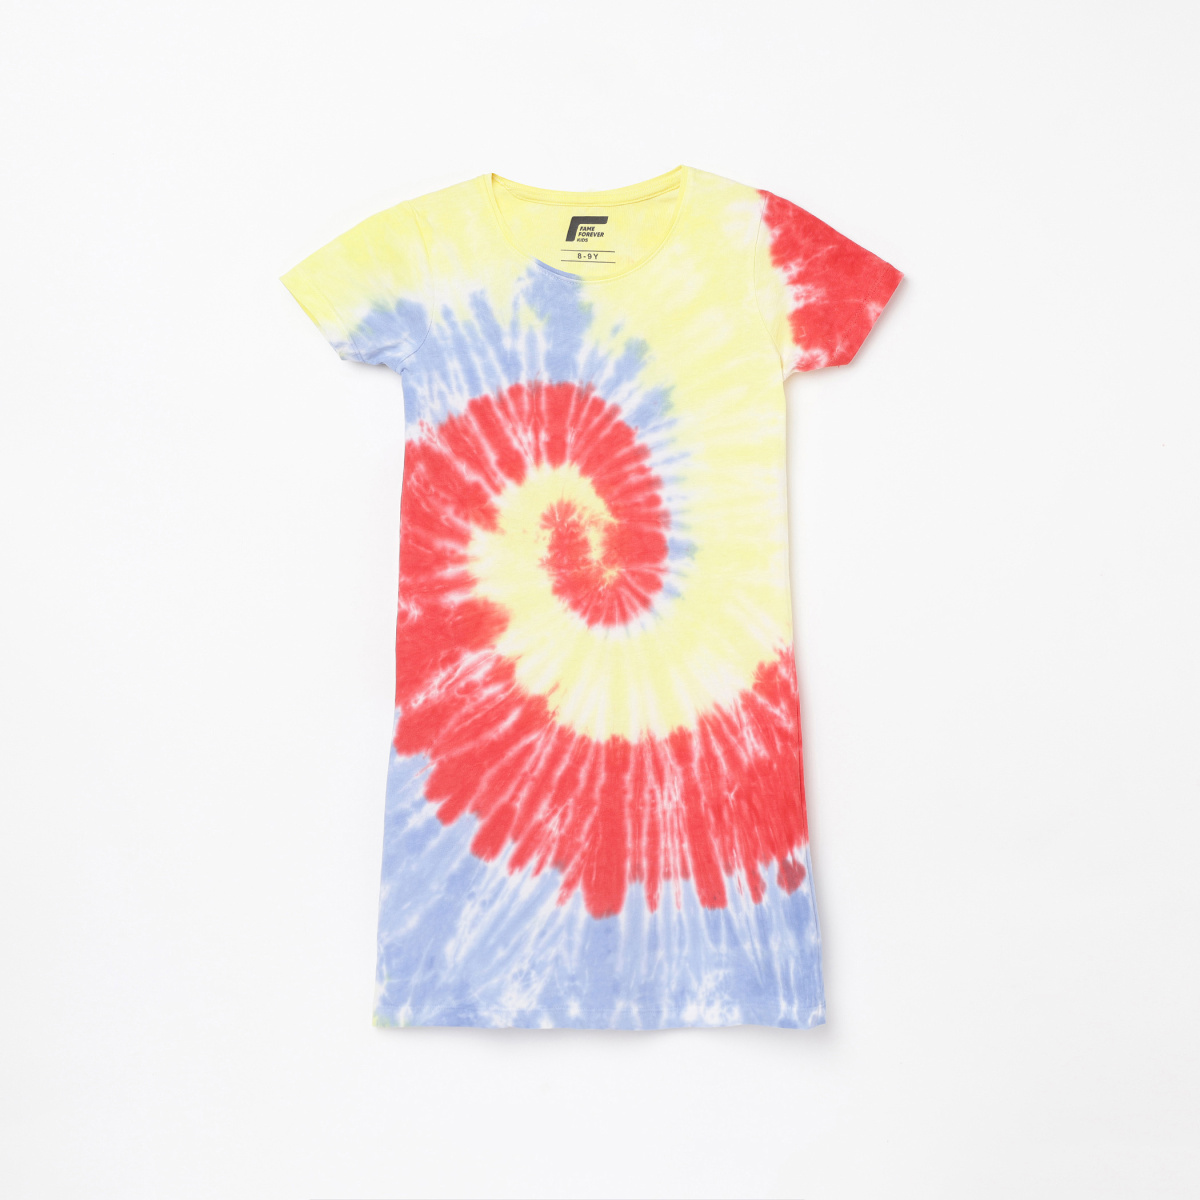 FAME FOREVER YOUNG Girls Tie-Dye Shift Dress